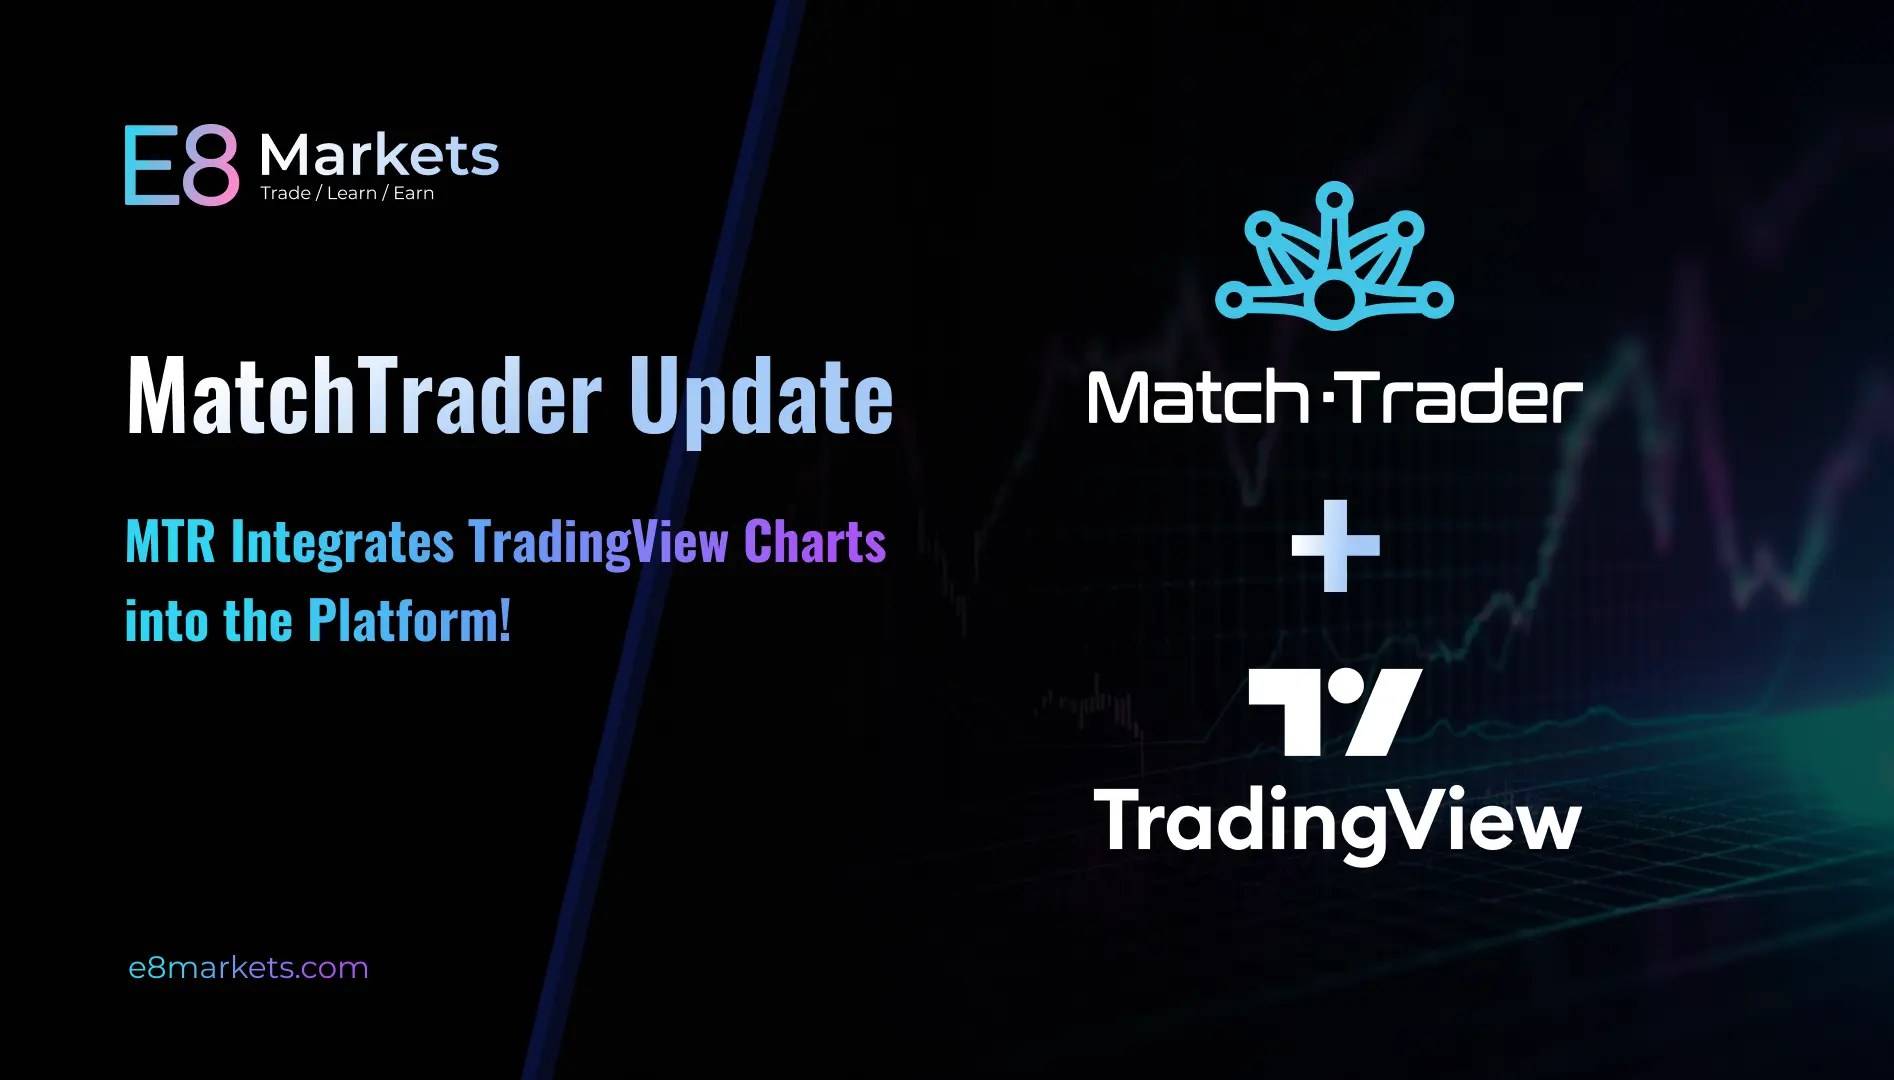 MatchTrader Gets a TradingView Upgrade